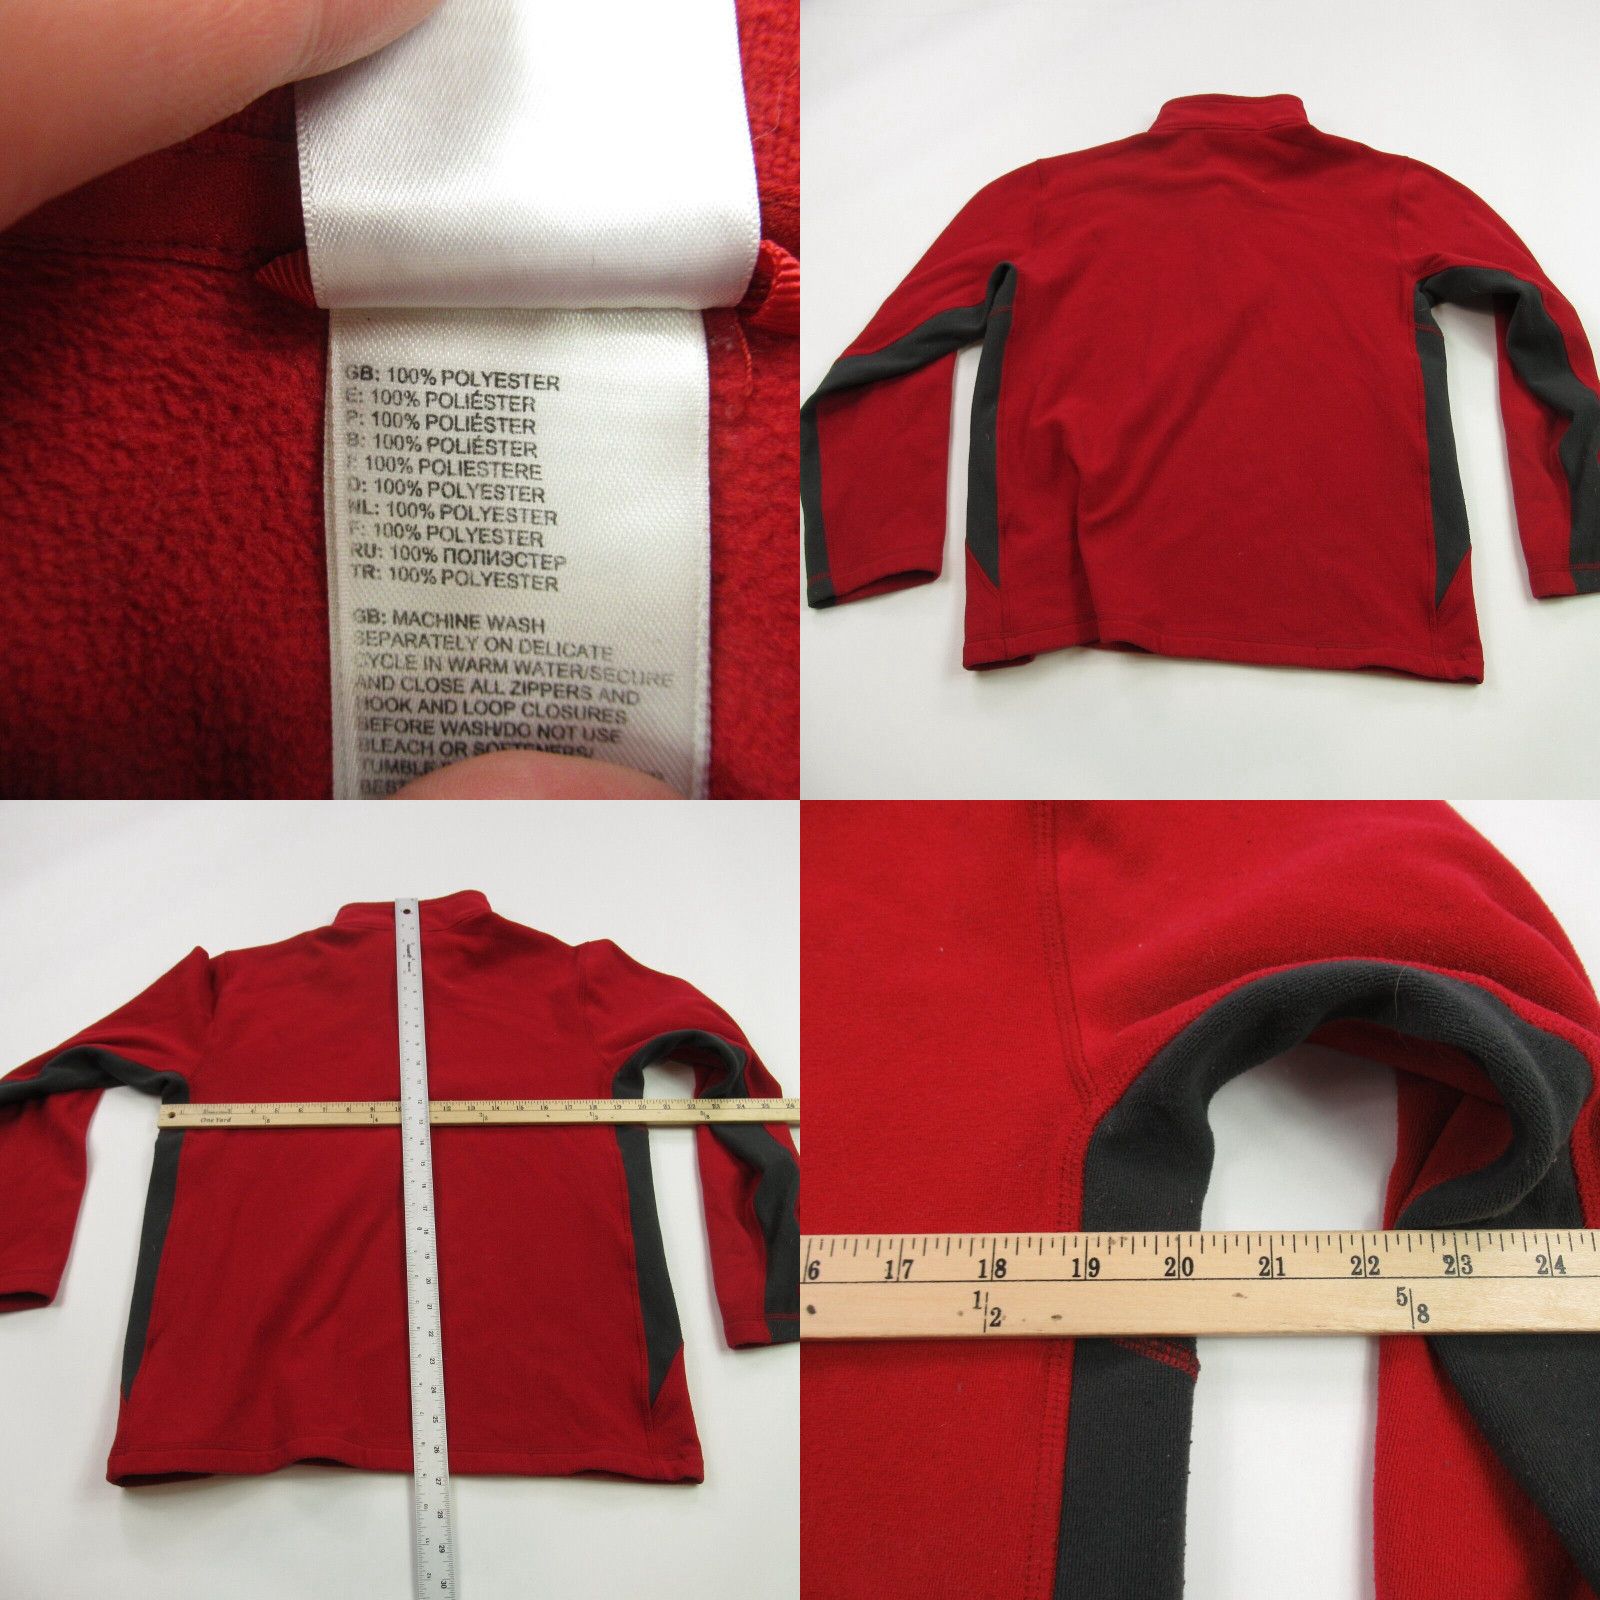 The North Face North Face Sweater Mens Large Long Sleeve 1/4 Zip Pullover Red Fleece Casual Size US L / EU 52-54 / 3 - 4 Preview